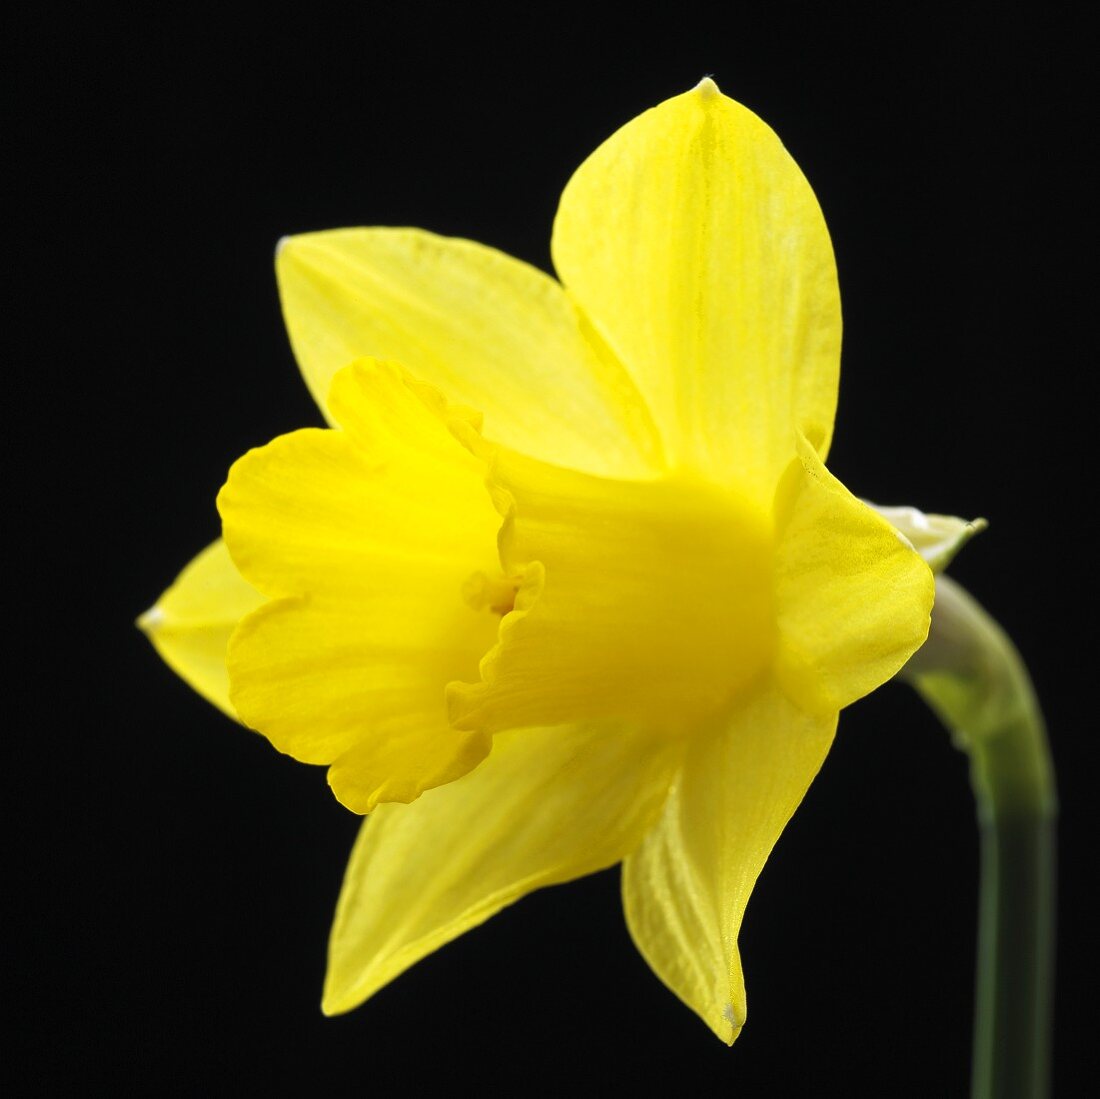 A narcissus